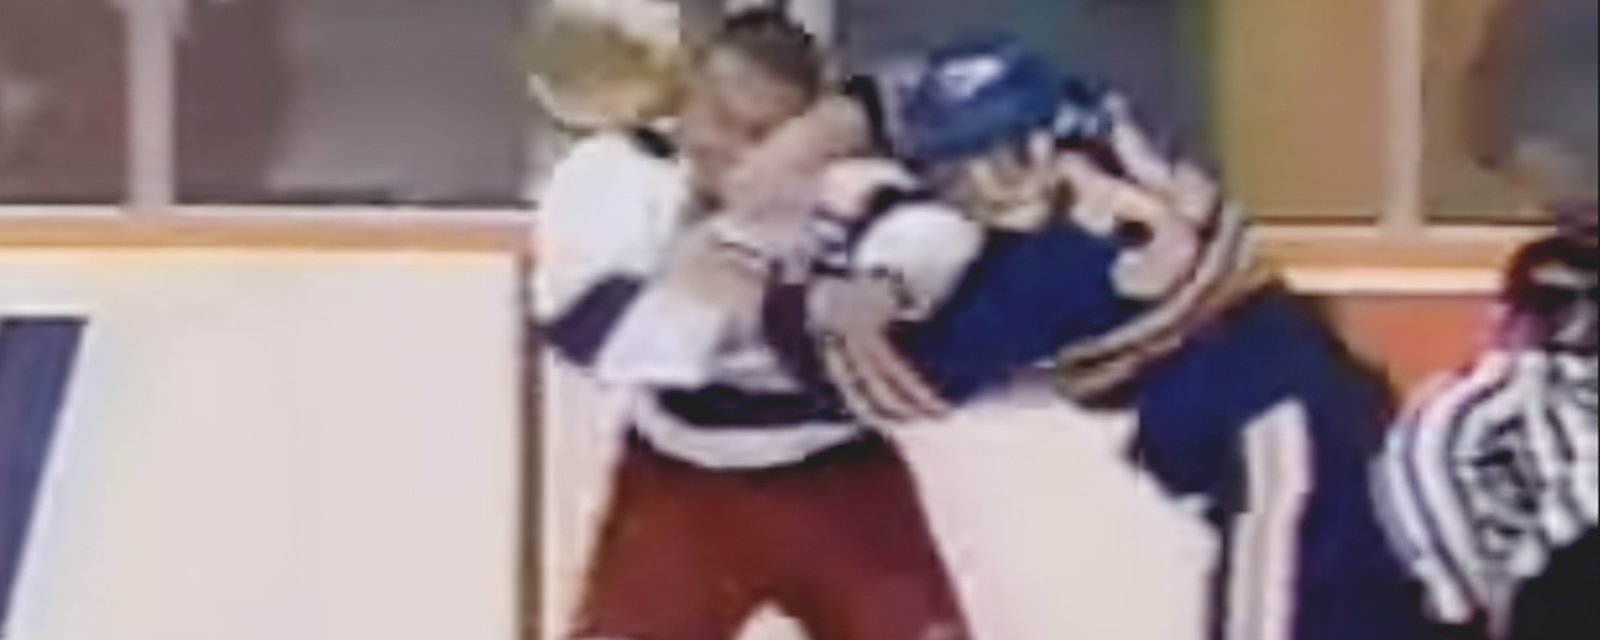 Must see : Rob Ray vs Tie Domi on Feb. 10 1993.